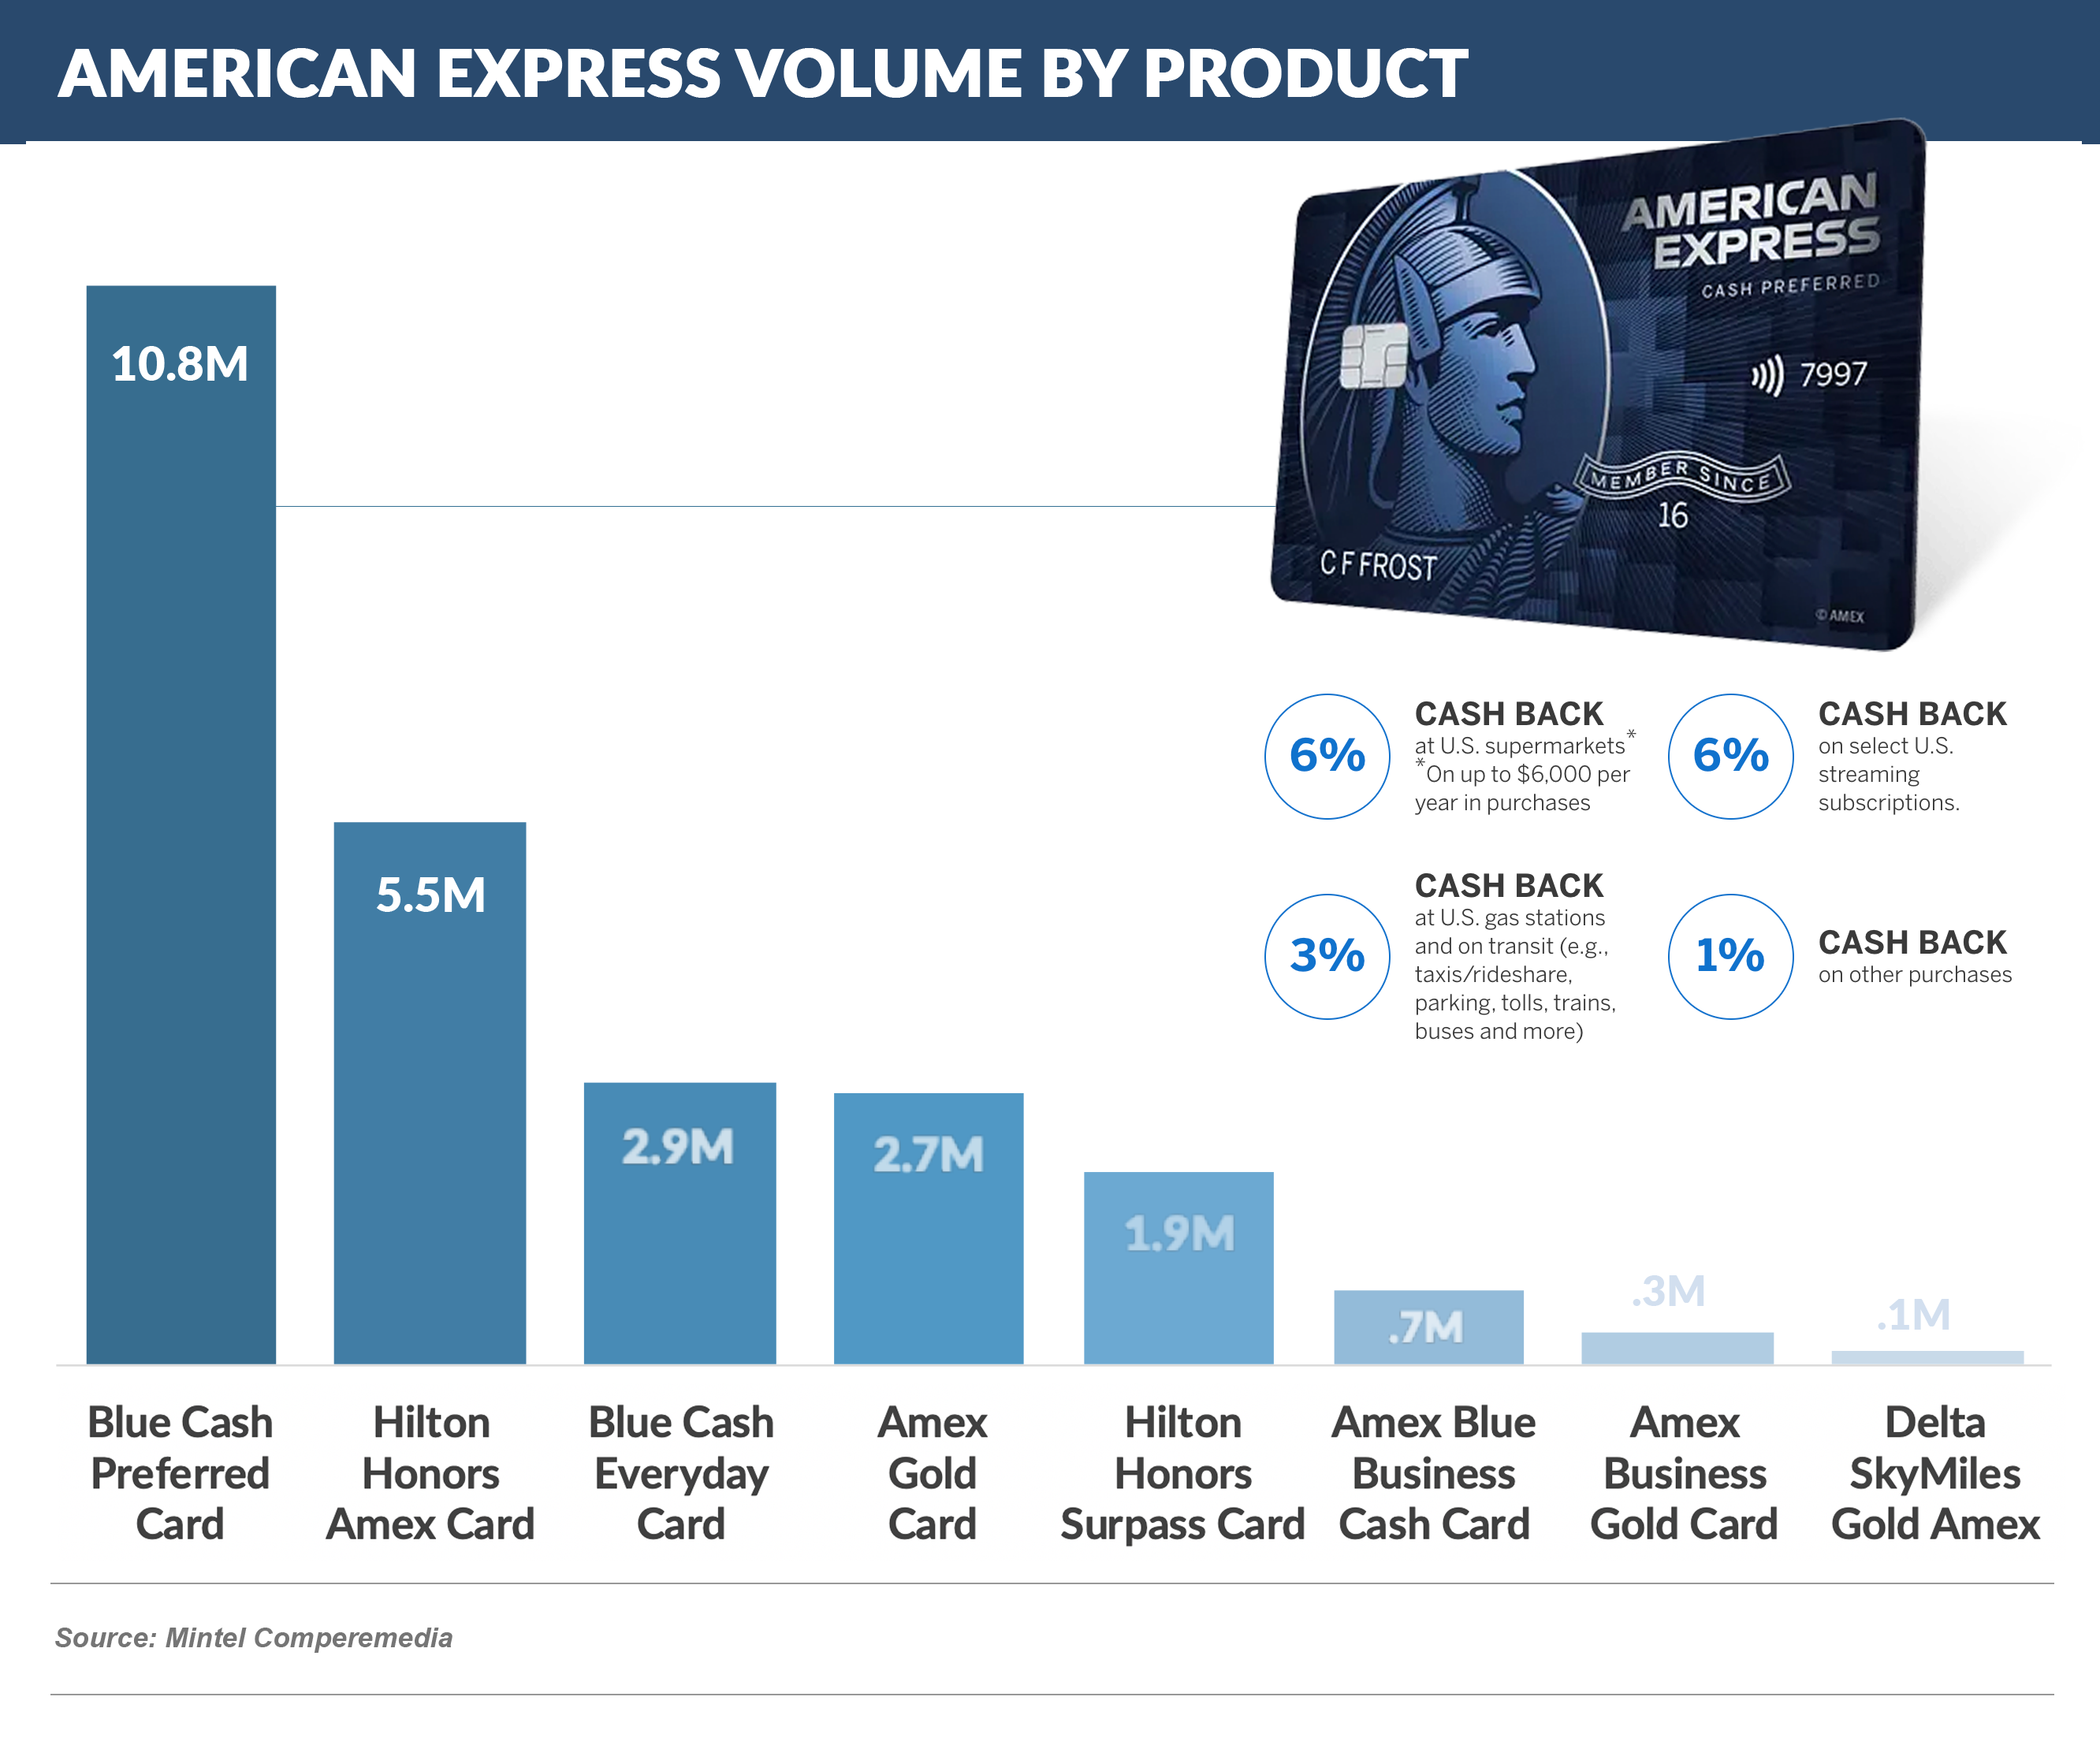 American Express Volume by Product (2)